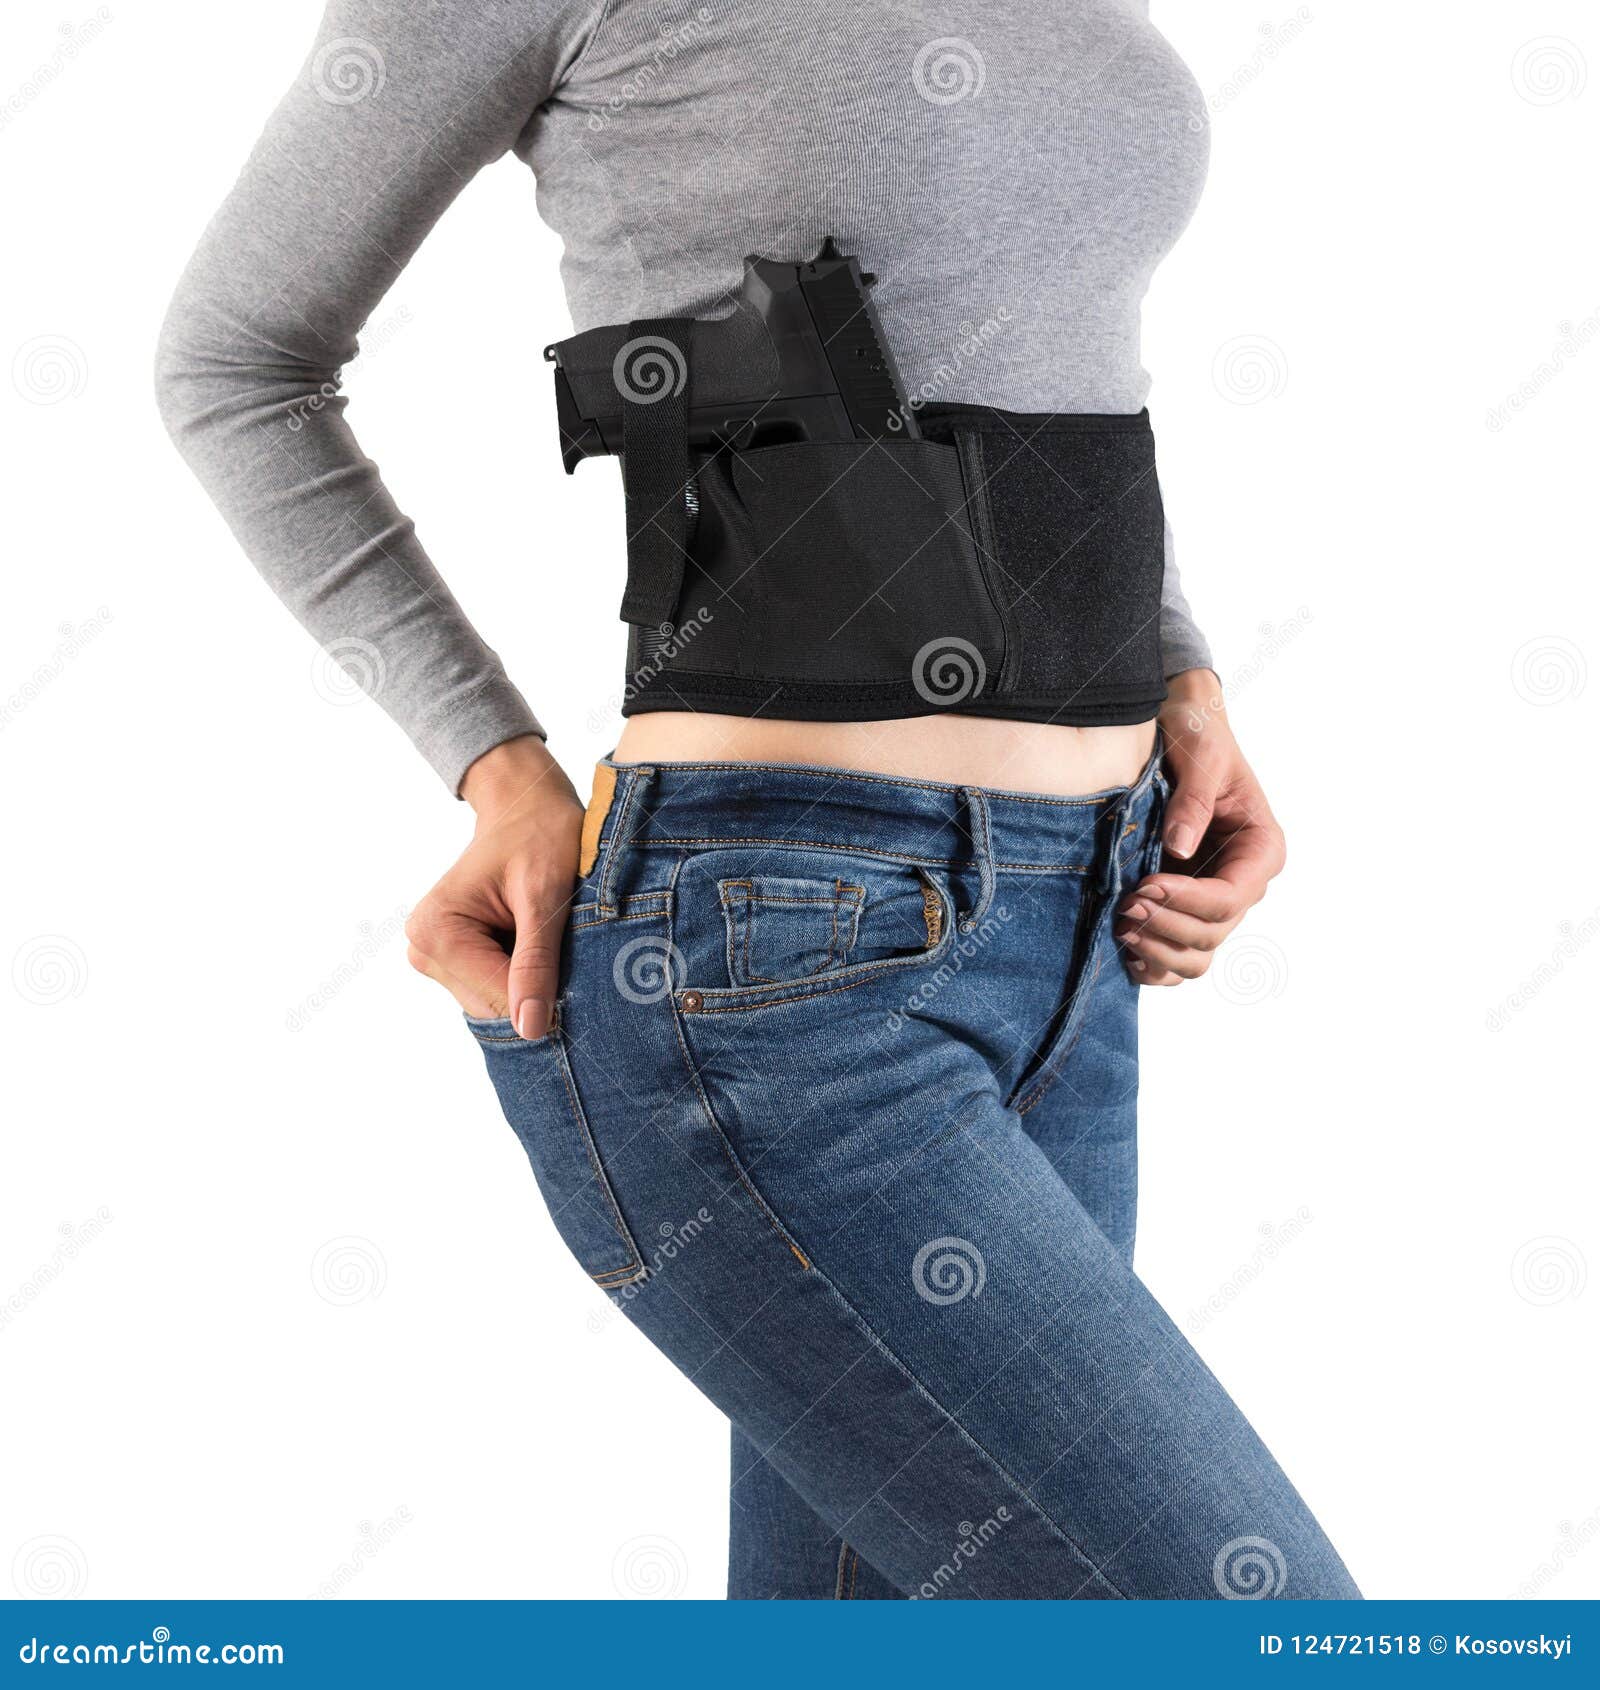 city tactical holster for concealed carrying weapons.